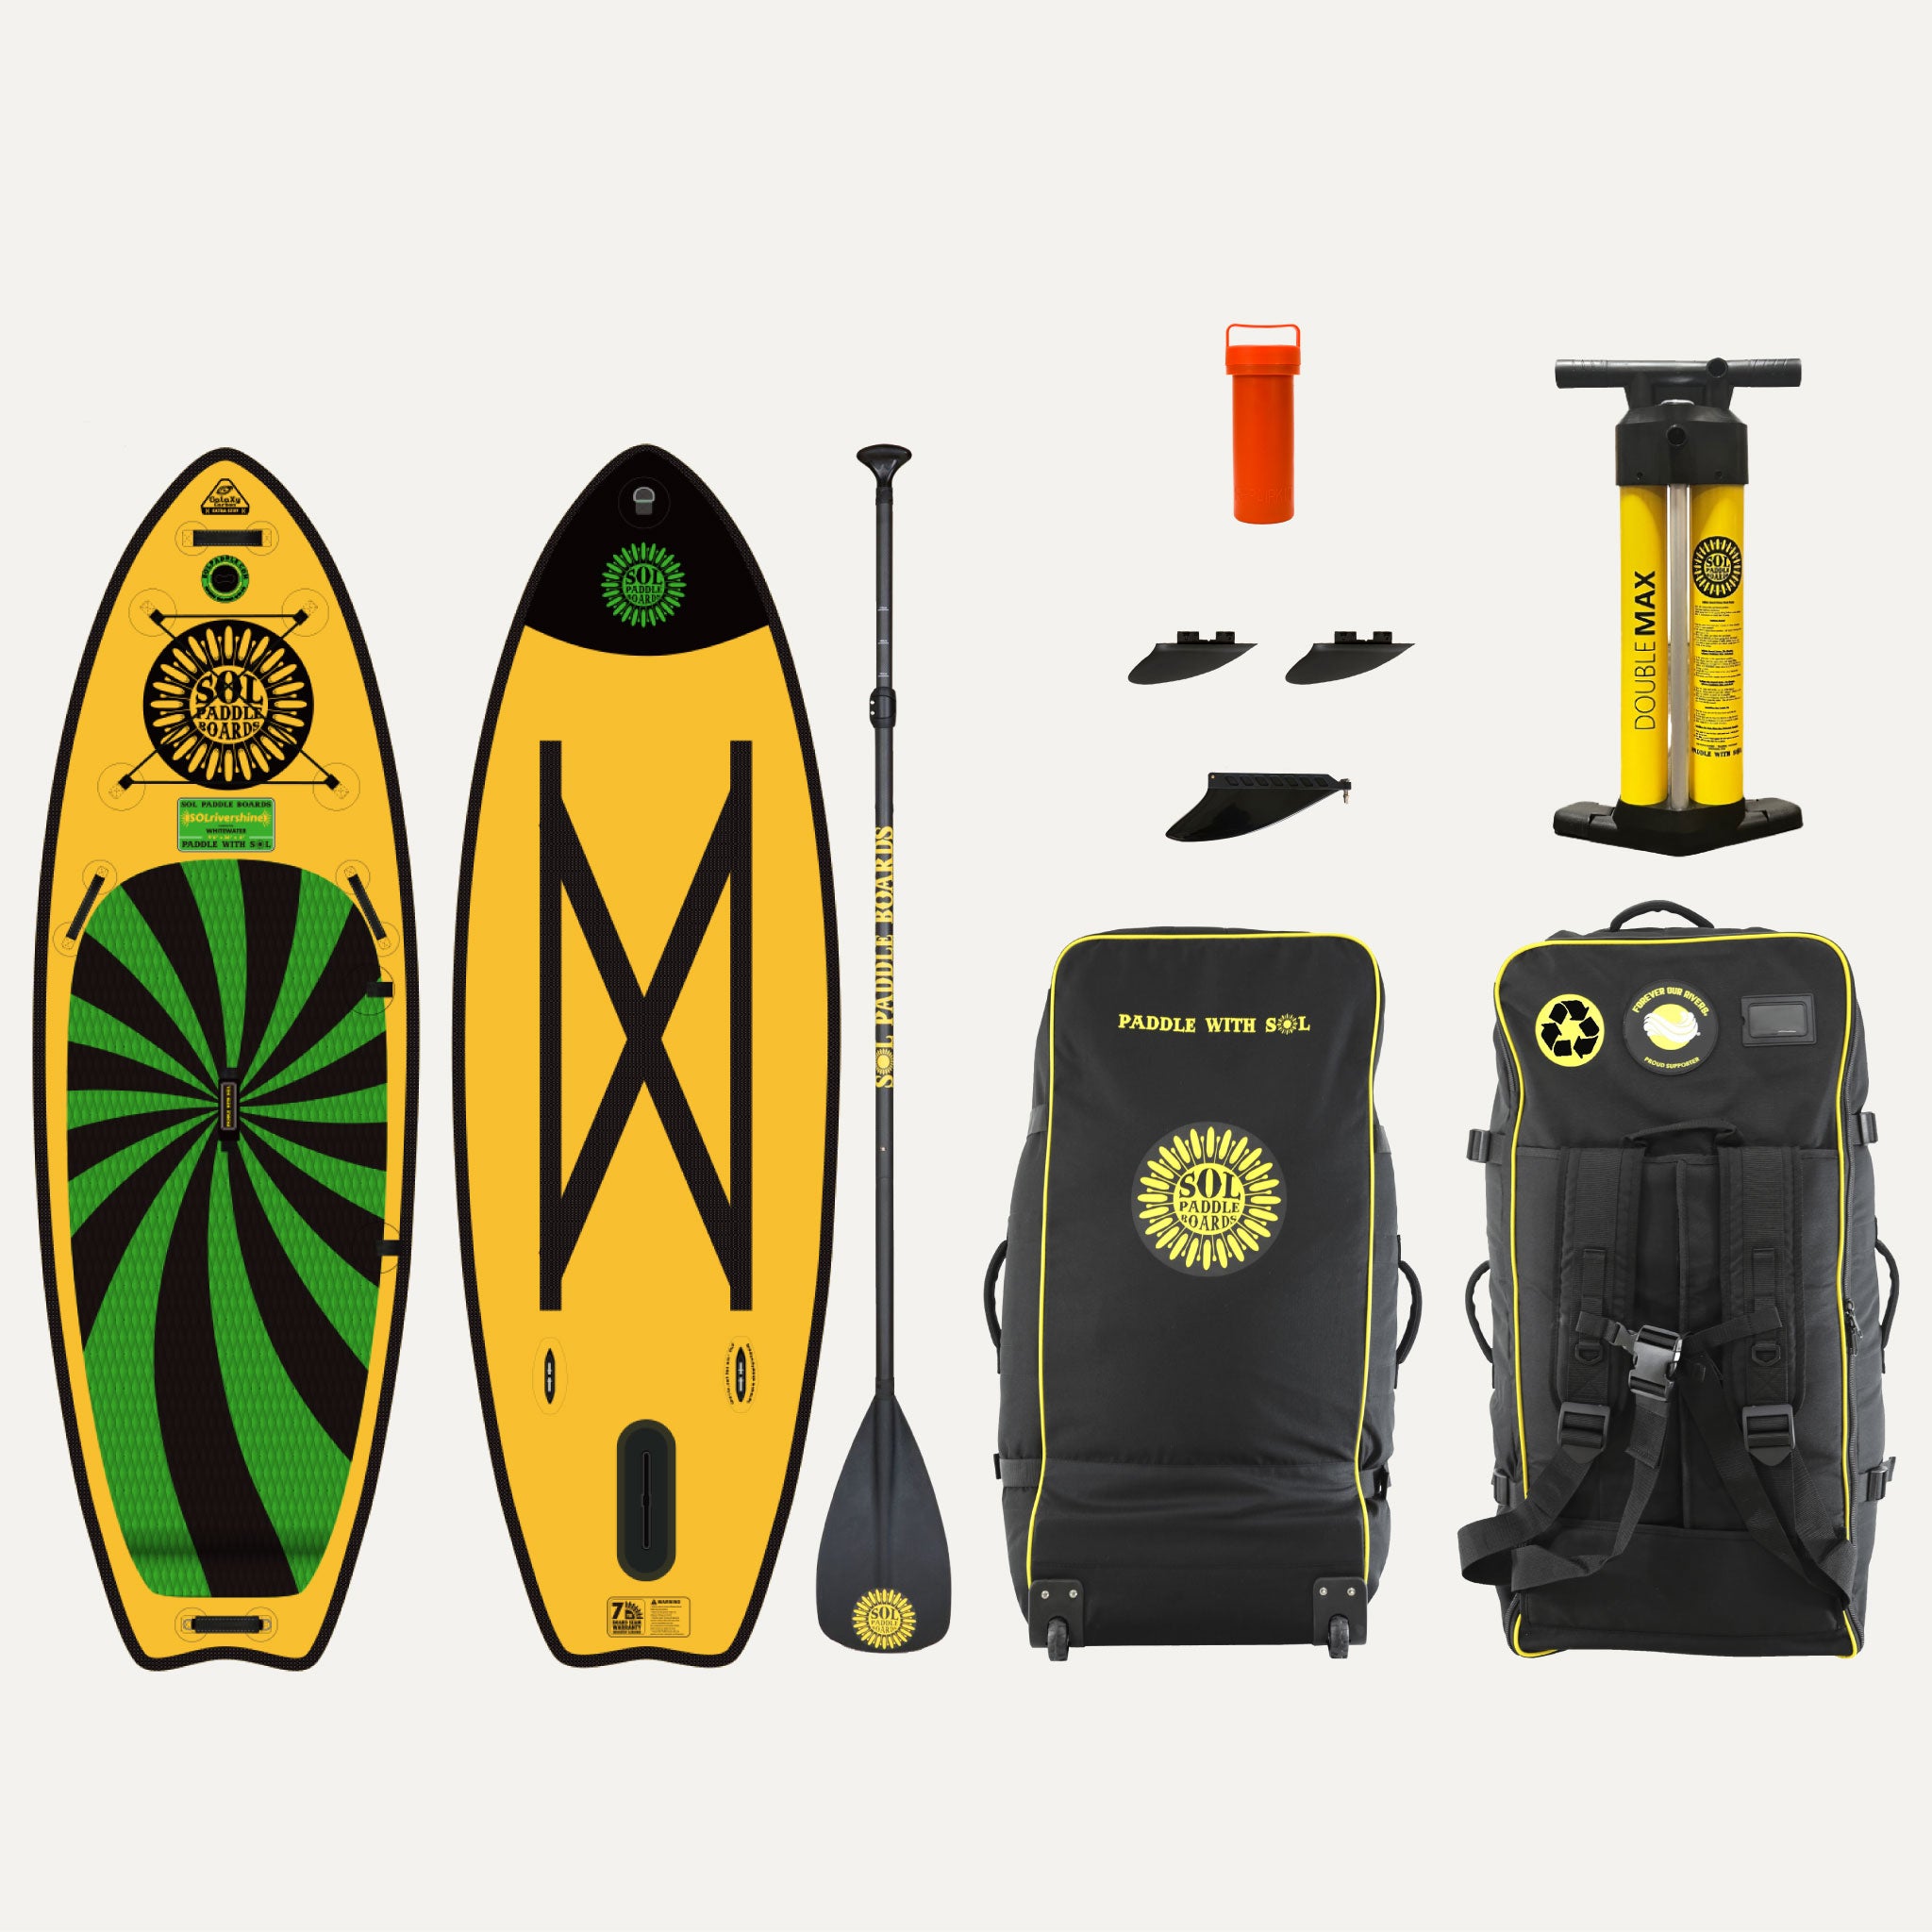 Carbon GalaXy SOLrivershine Inflatable Paddle Board showcasing the top and bottom views of the SUP board and the accessories that come with it